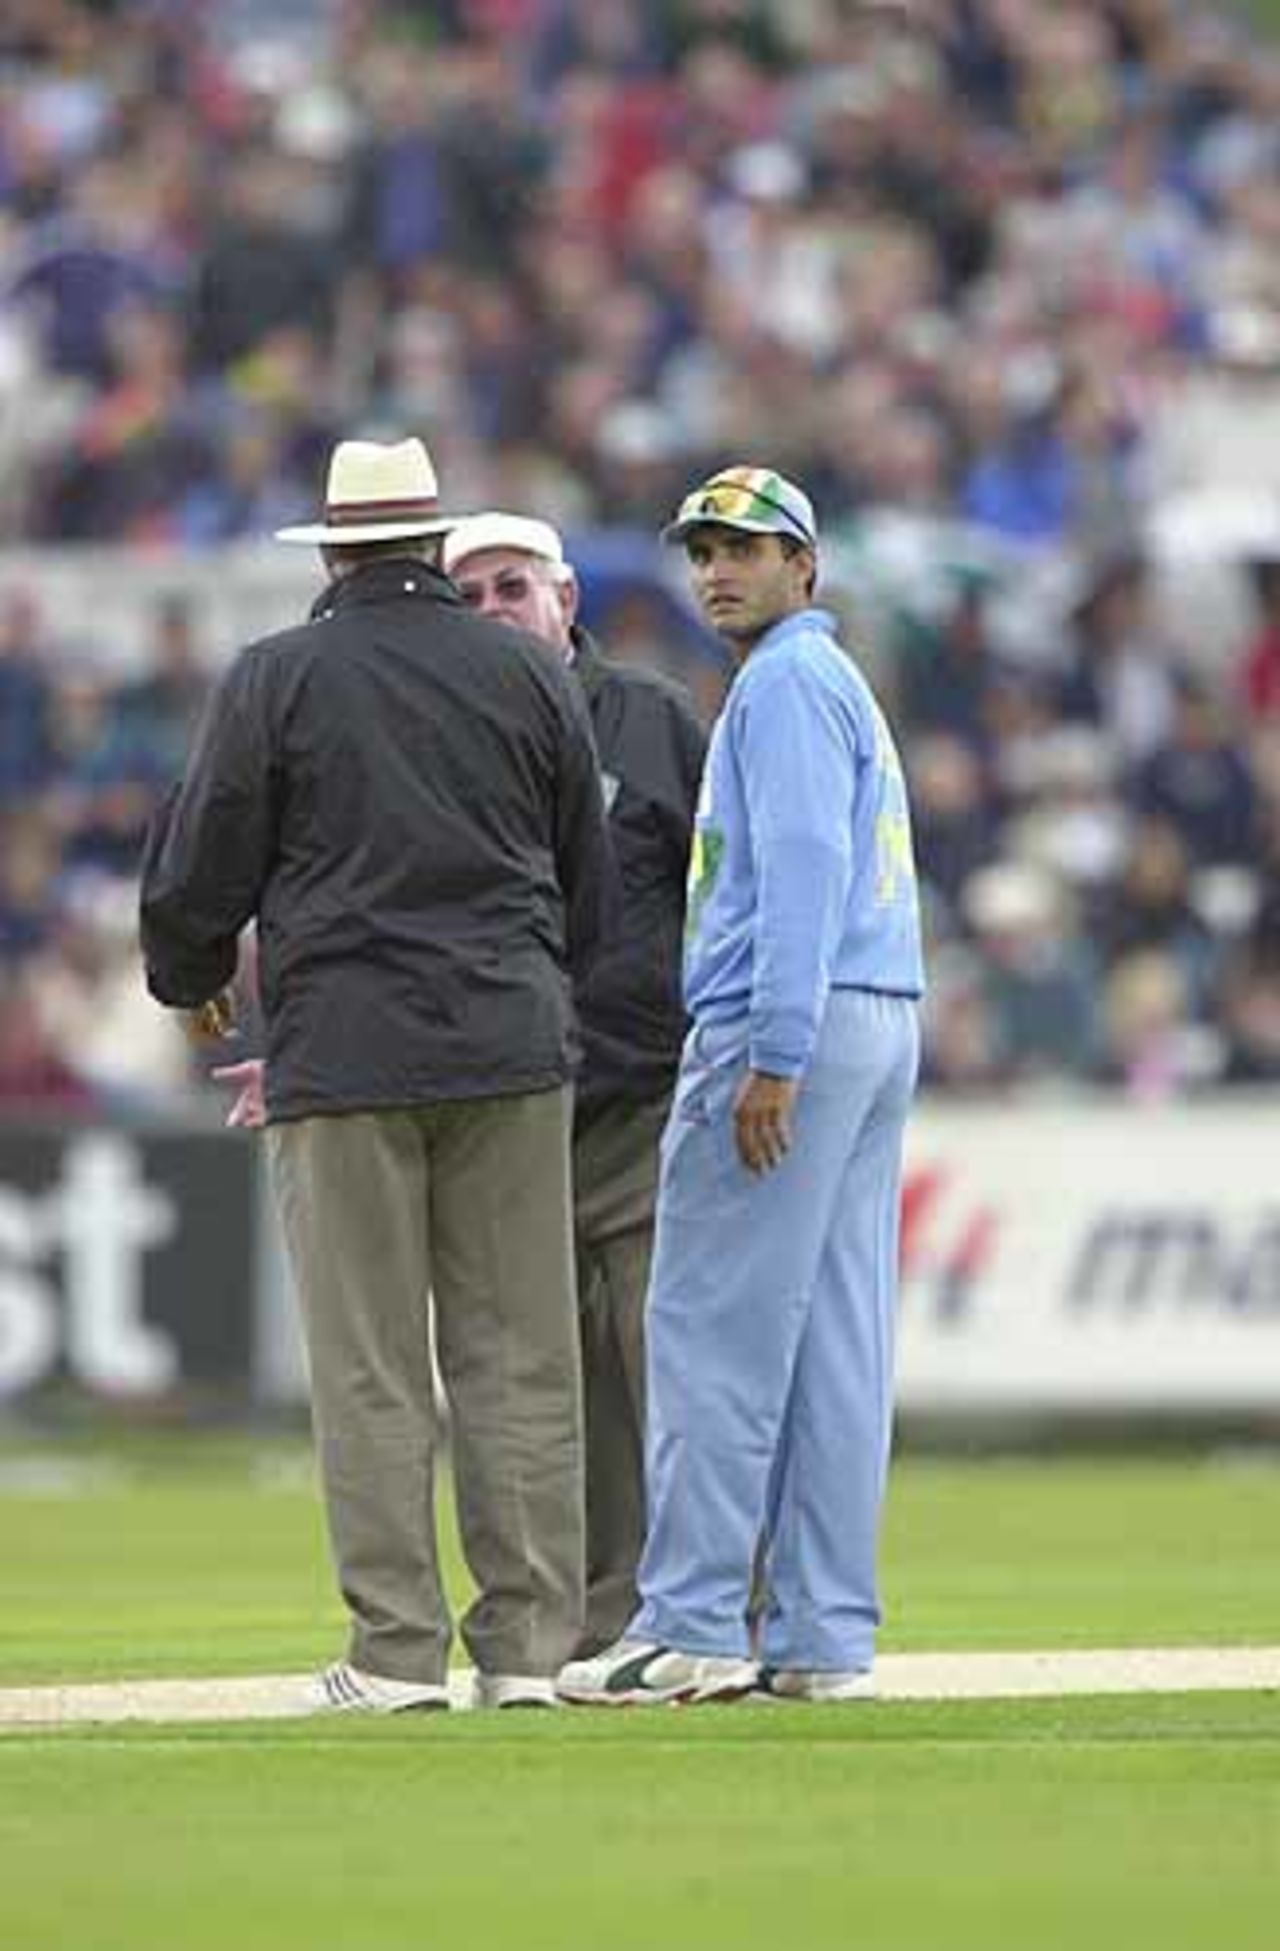 The umpires in earnest discussion concerning the weather as Ganguly waits on, England v India at Chester-le-Street, July 2002